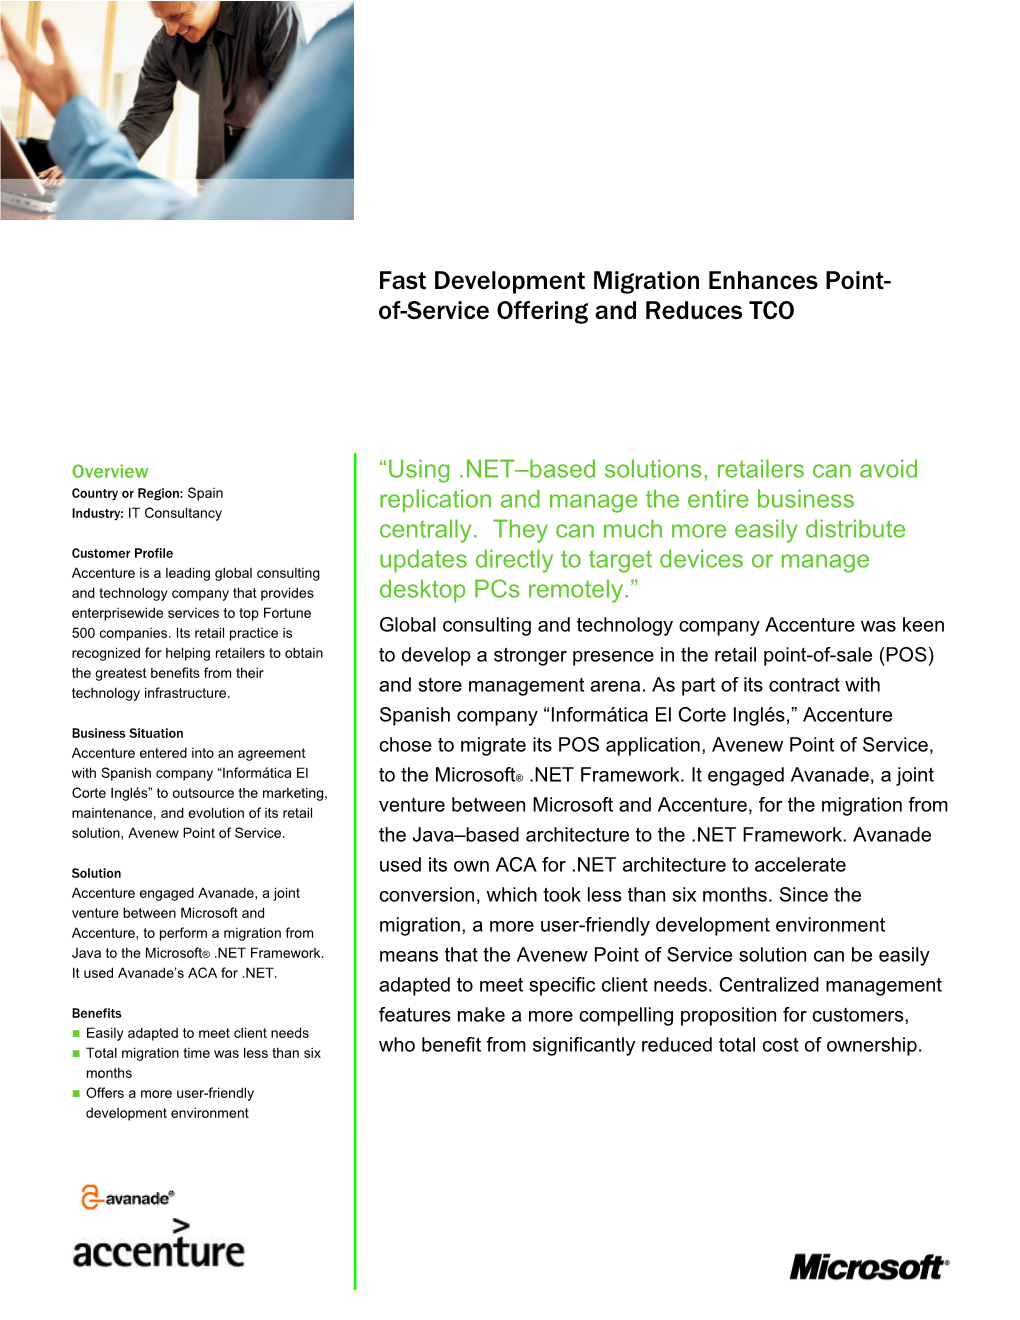 Fast Development Migration Enhances Point-Of-Service Offering and Reduces TCO